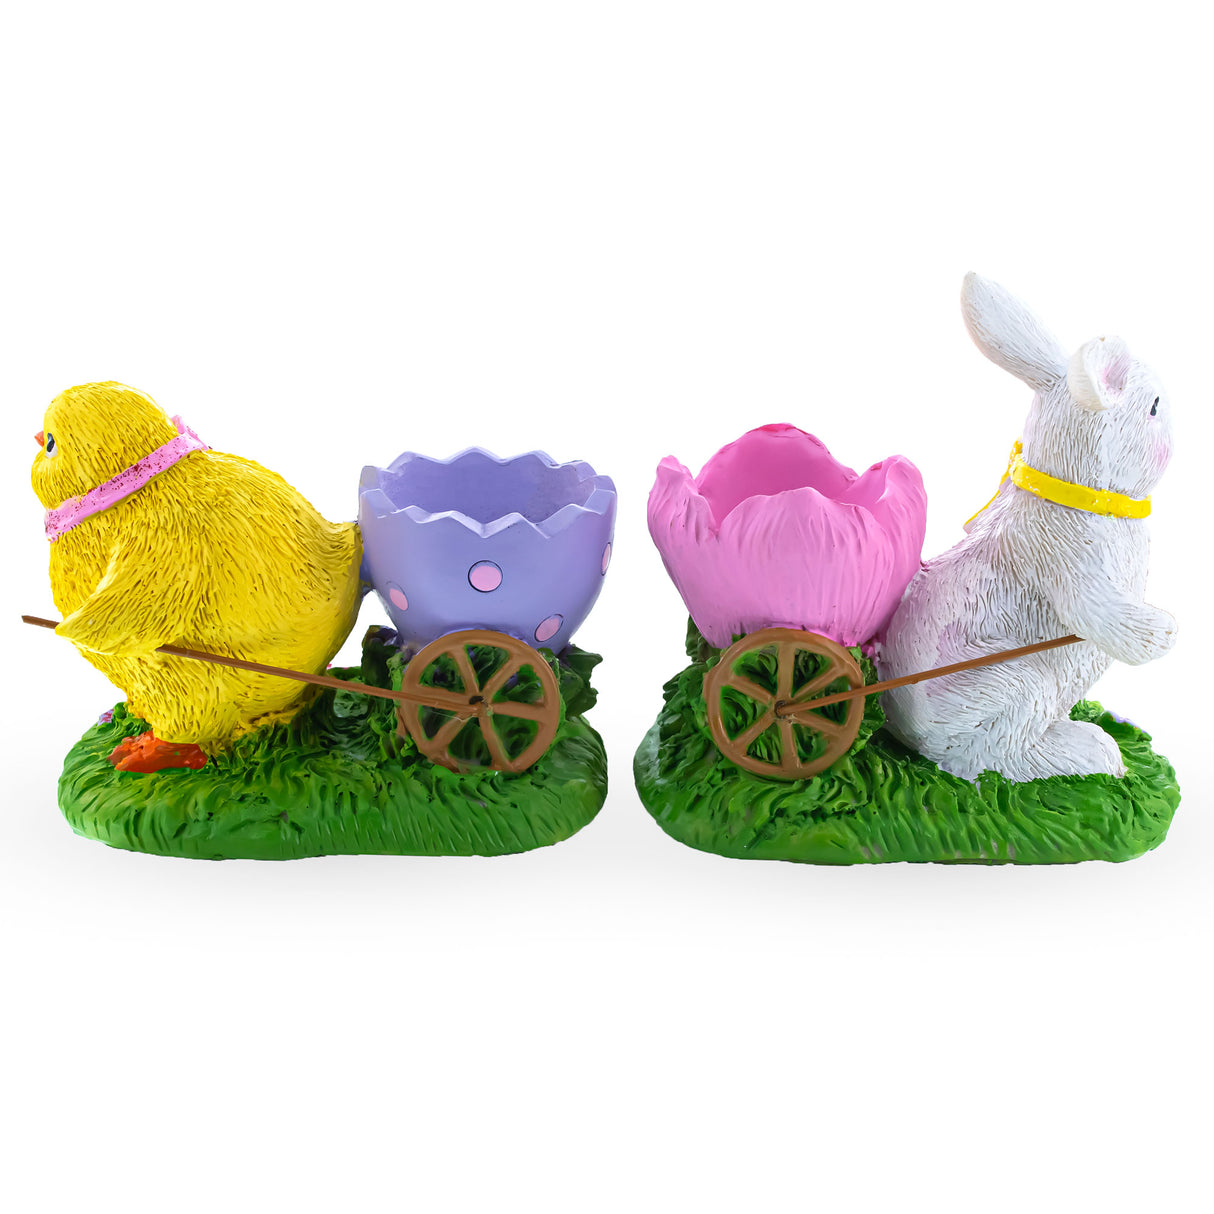 Springtime Symphony Hand-Painted Egg Holder Figurines 5 Inches ,dimensions in inches: 5 x 10.17 x 7.64